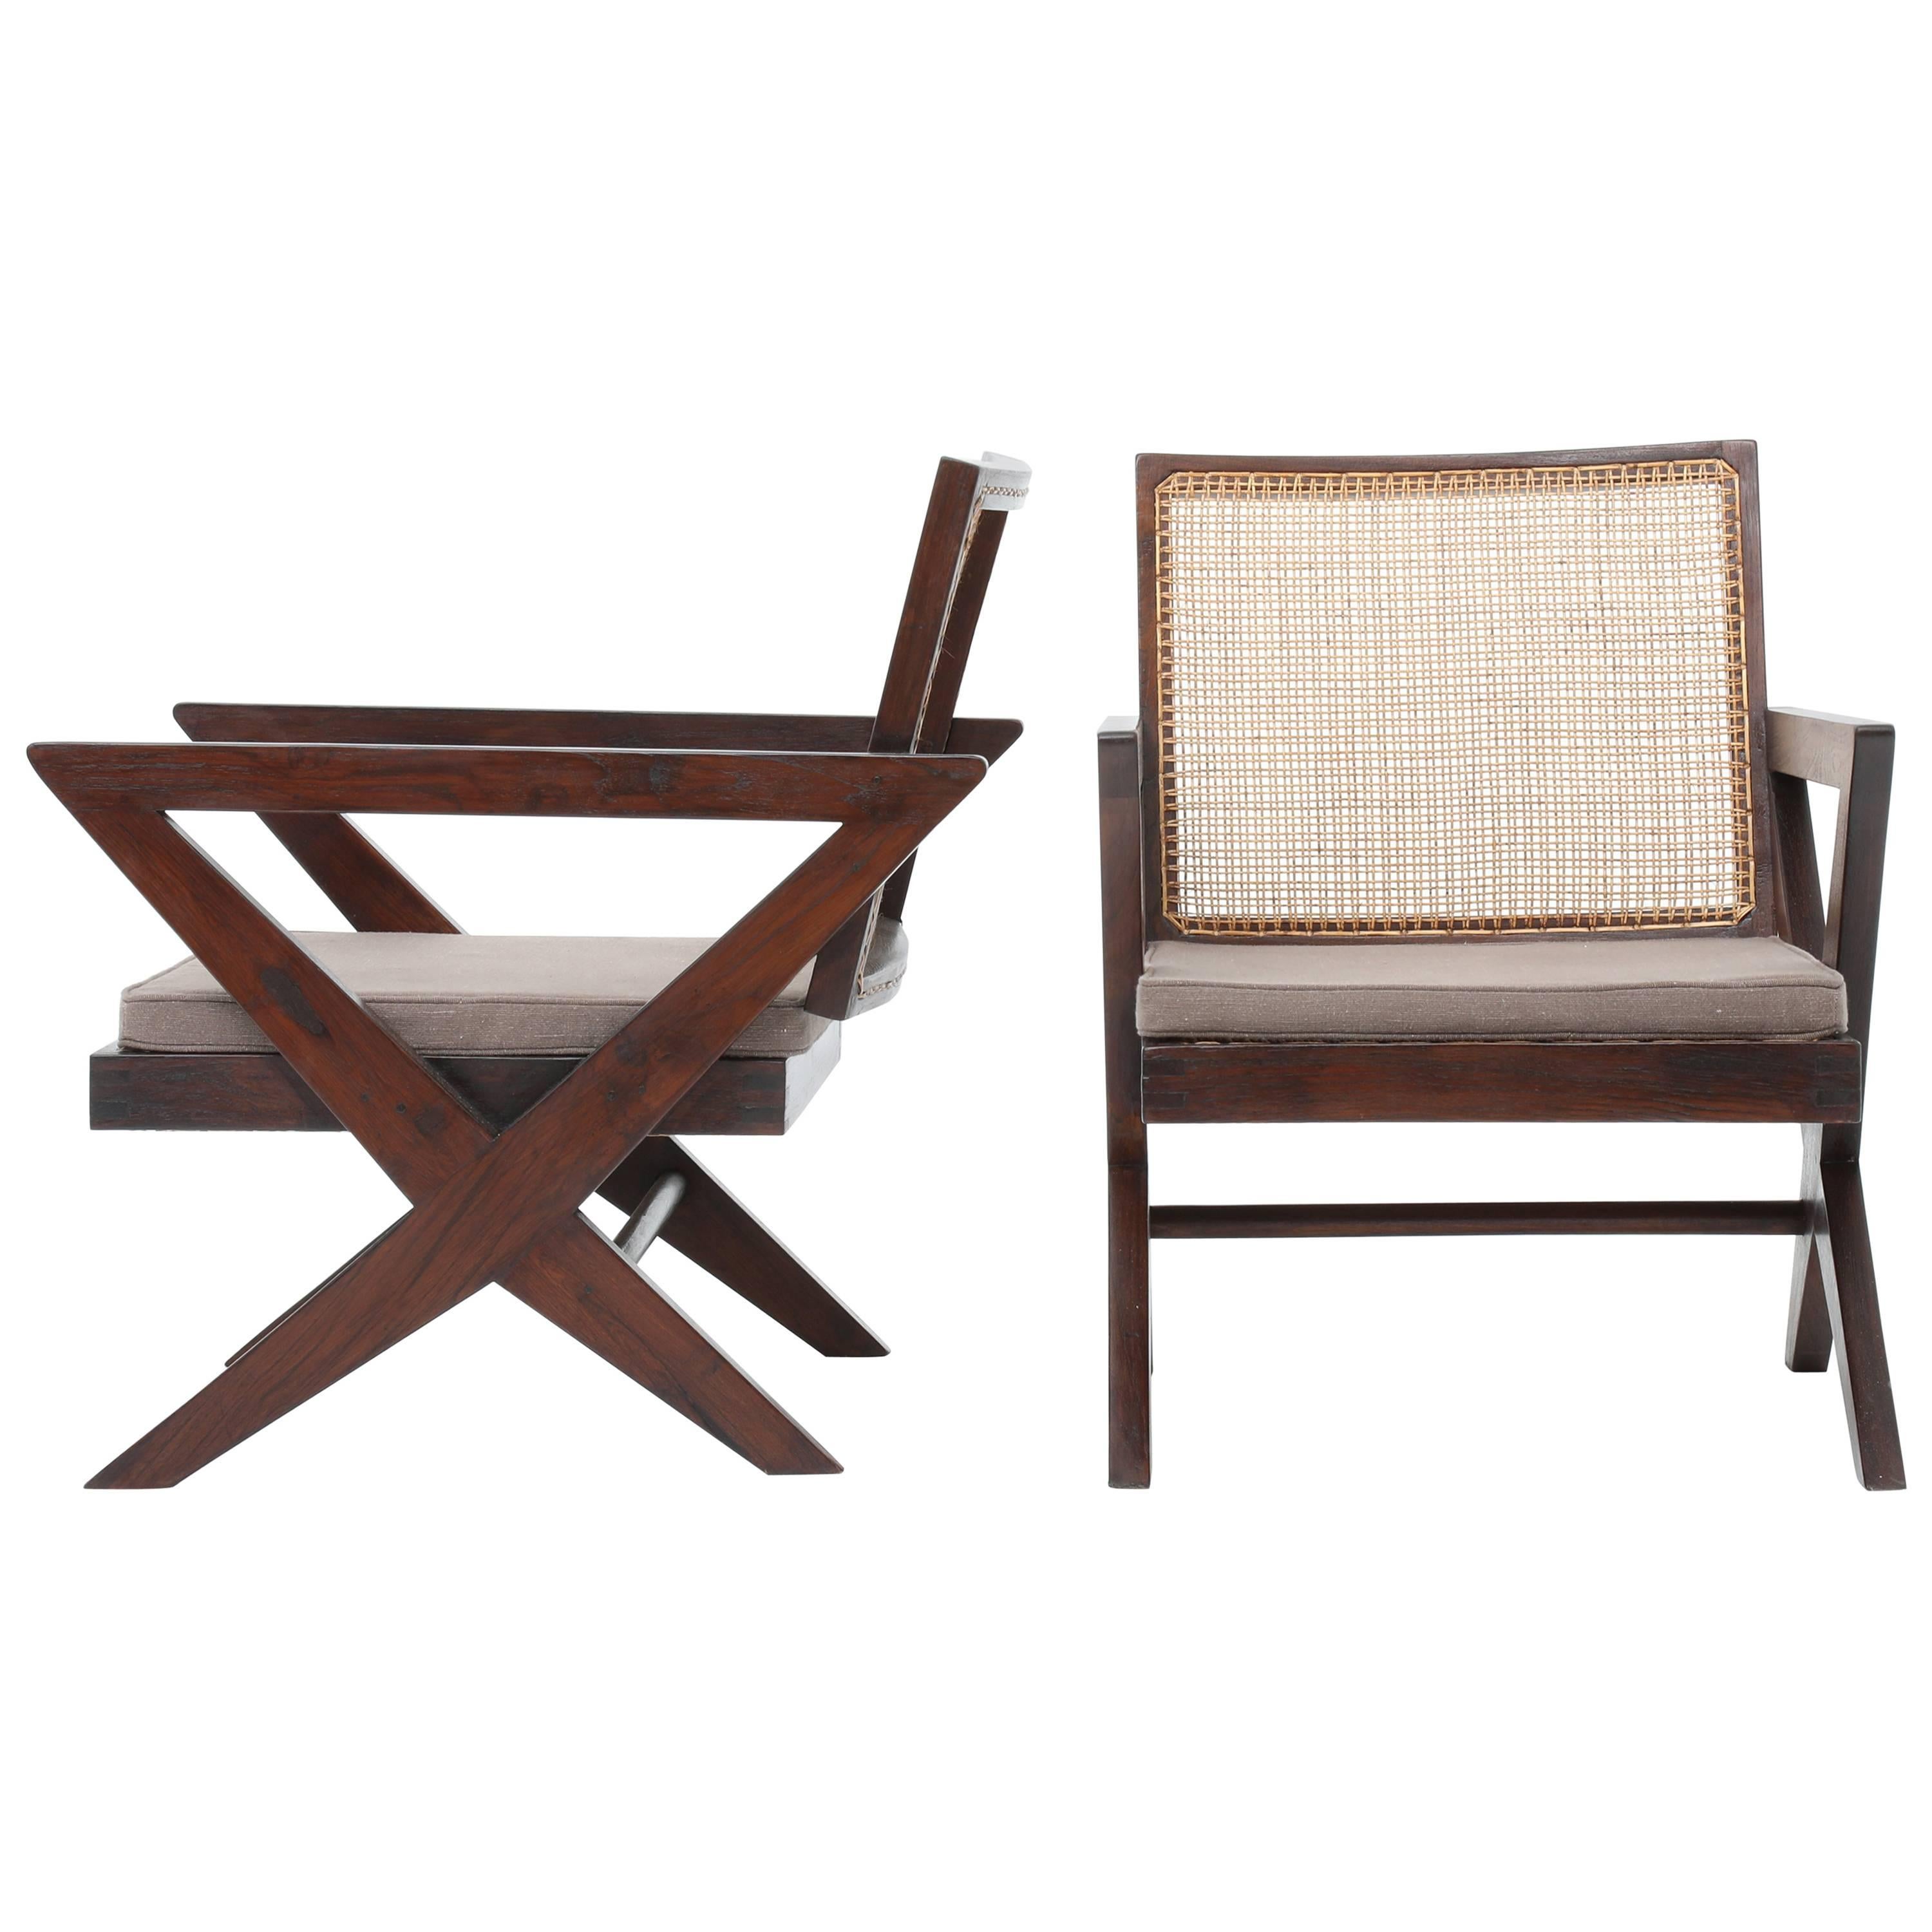 Pierre Jeanneret, Pair of "Cross Easy" Armchairs